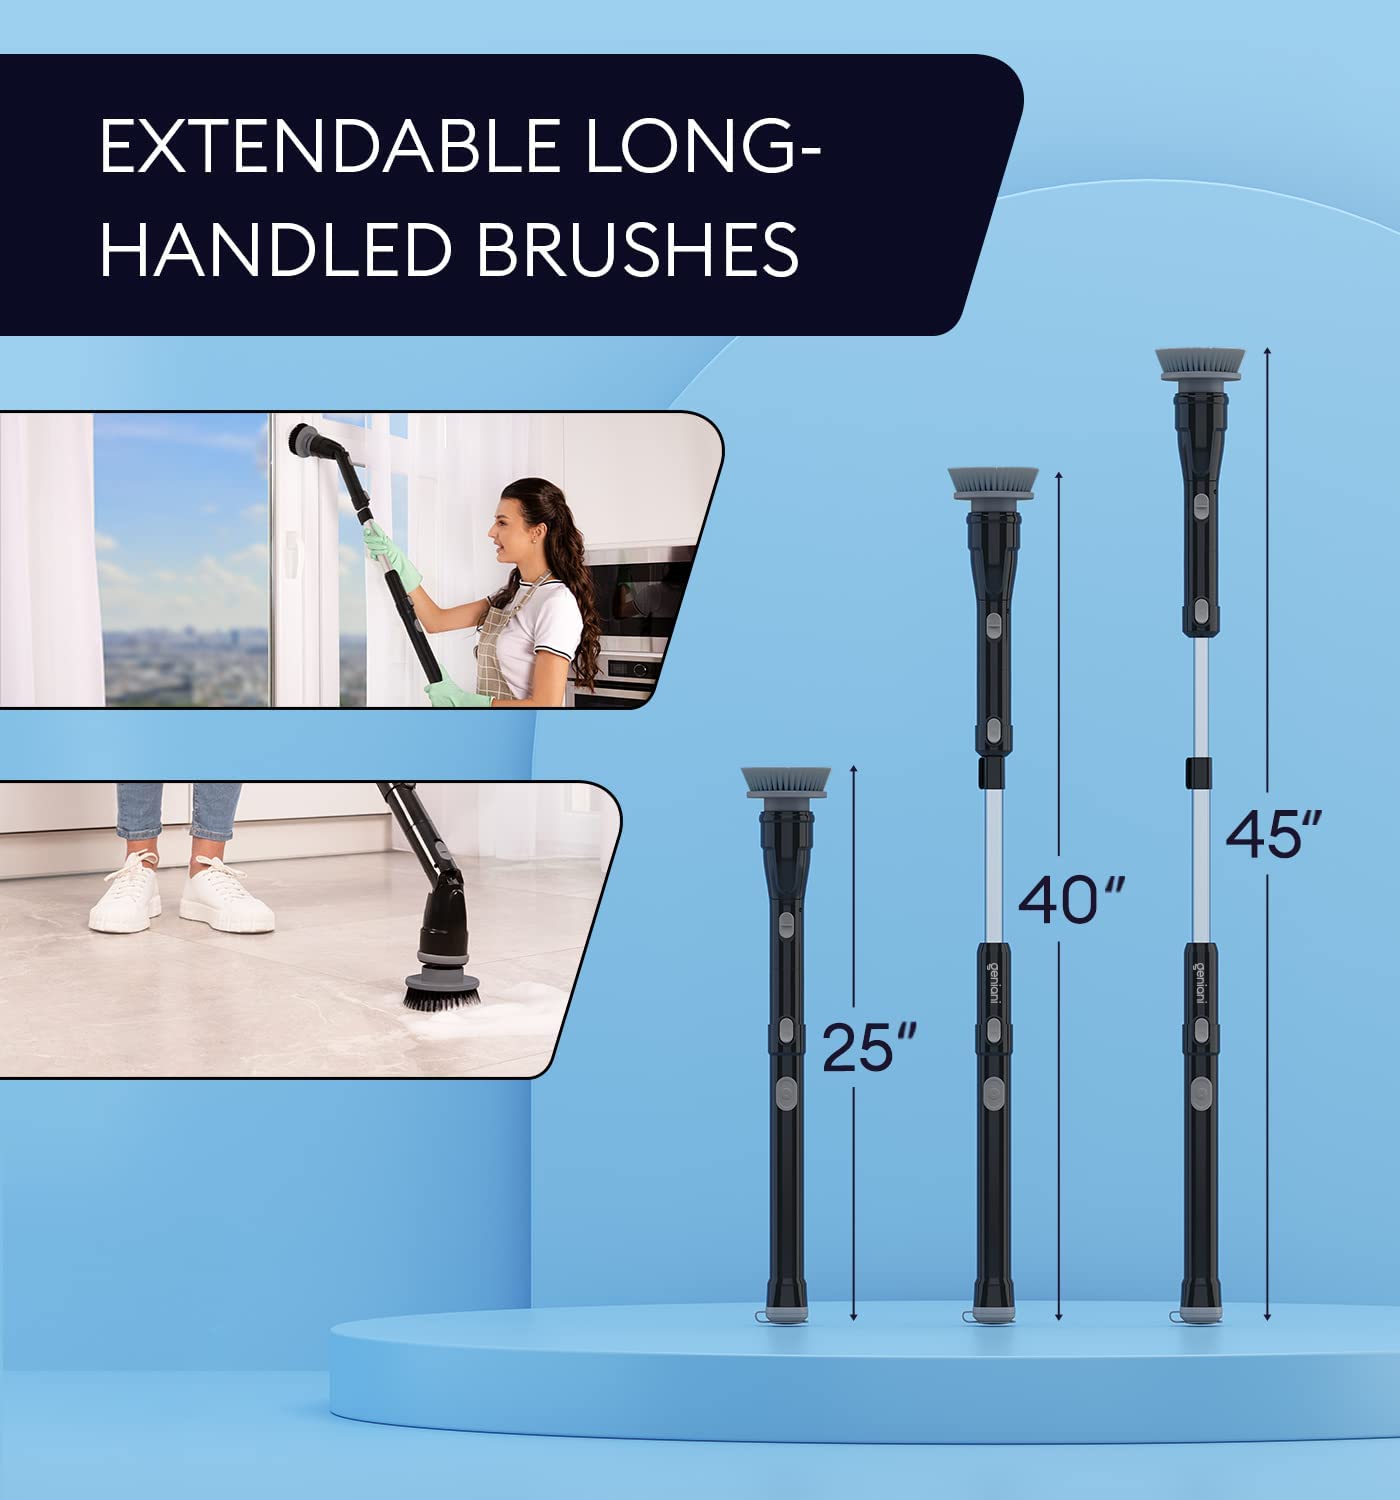 Cordless Electric Spin Powerful Scrubber 360 Rotating Brush For Cleaning Tile Floor Shower Tub